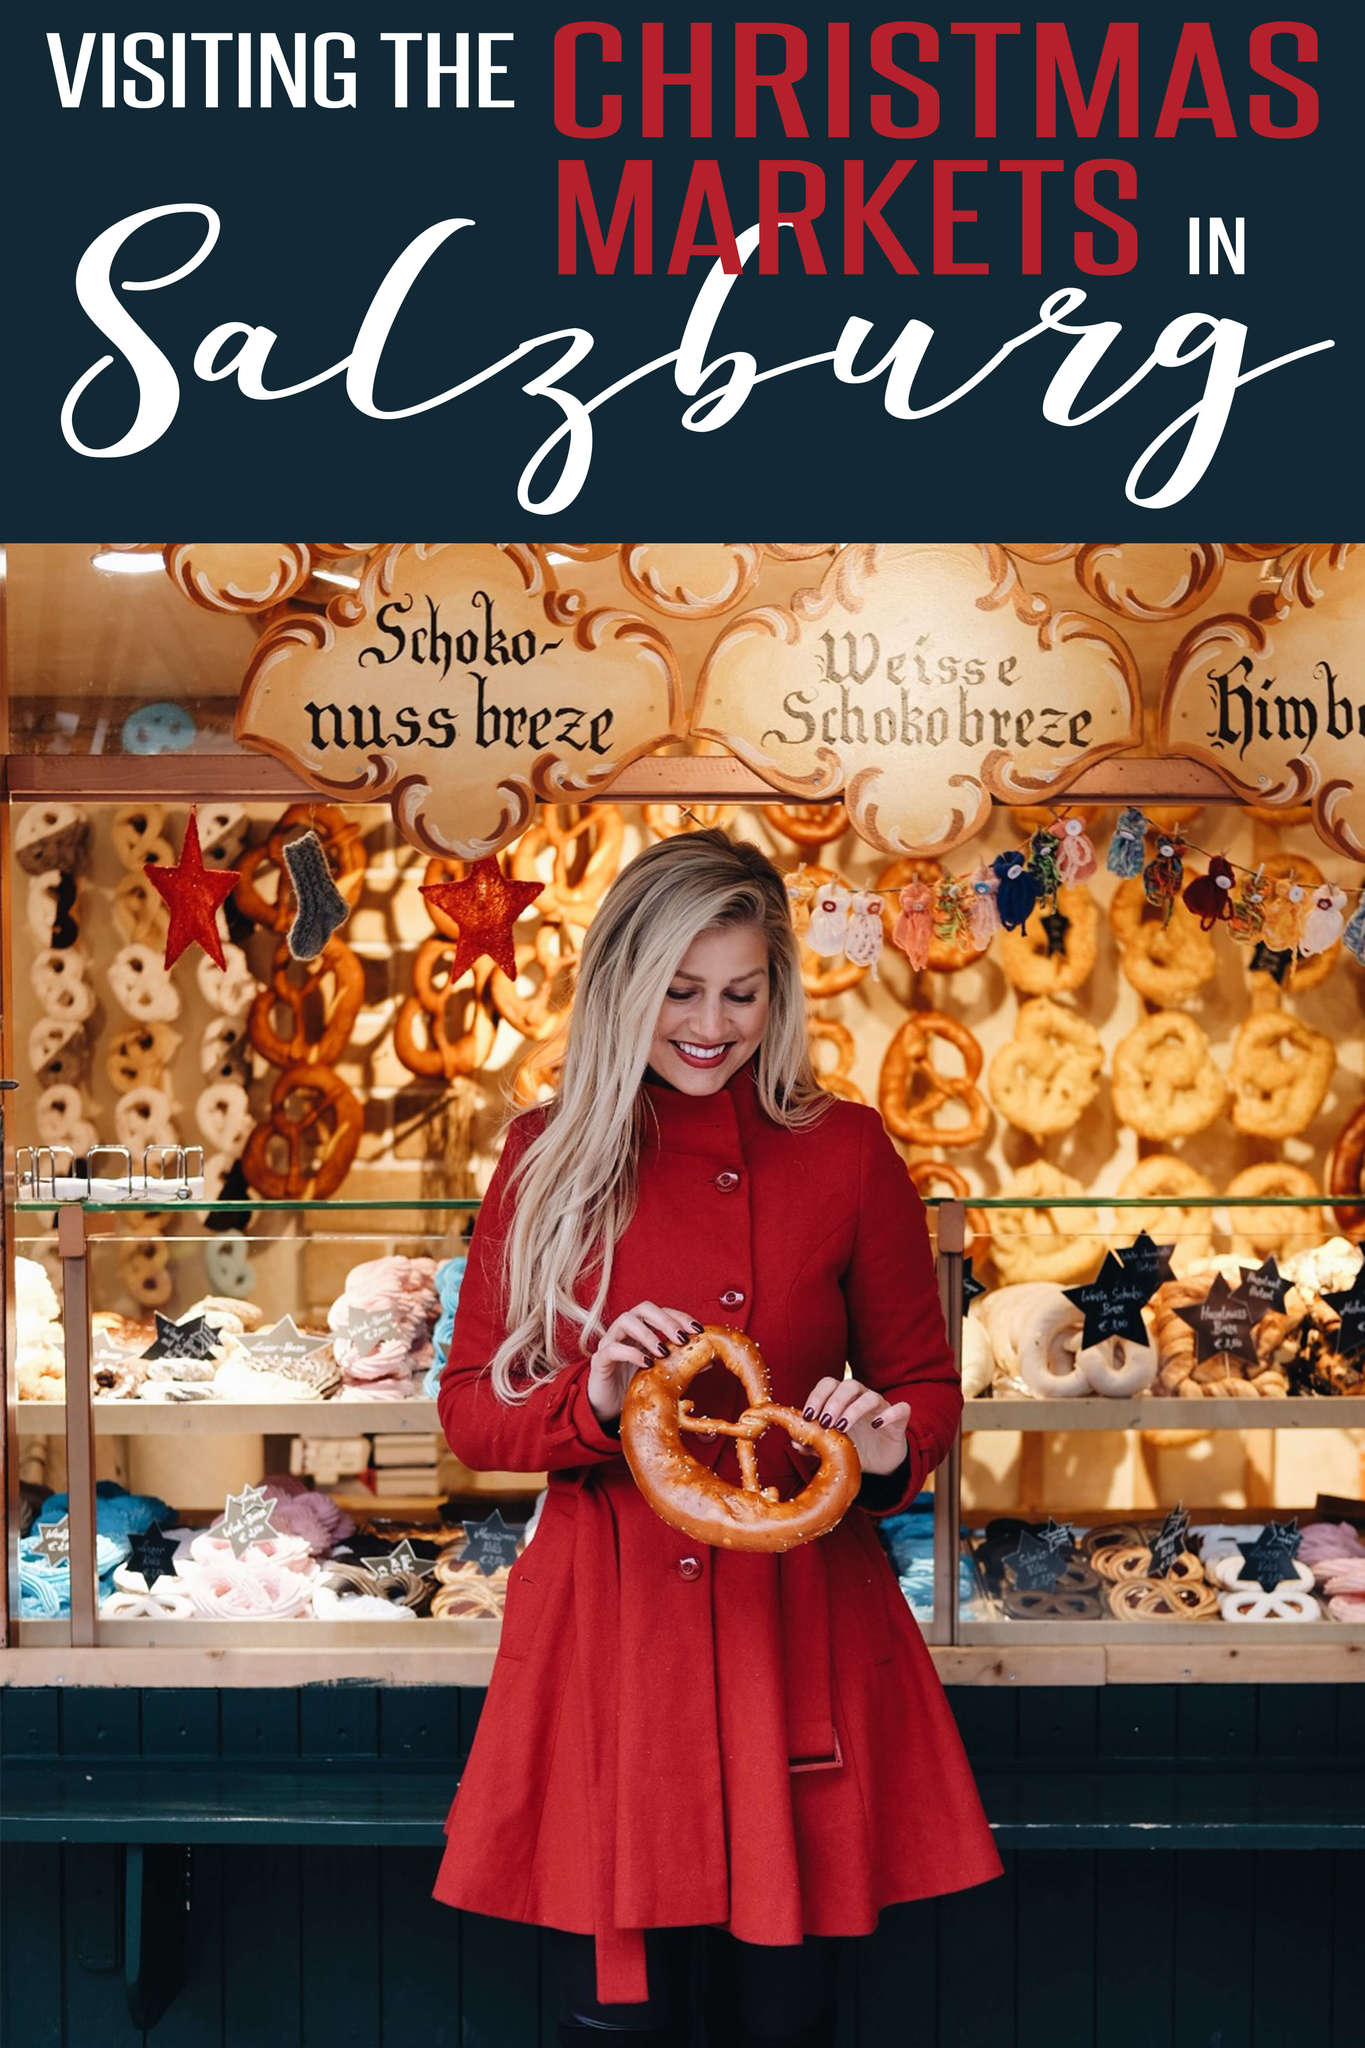 Visiting the christmas markets in Salsburg